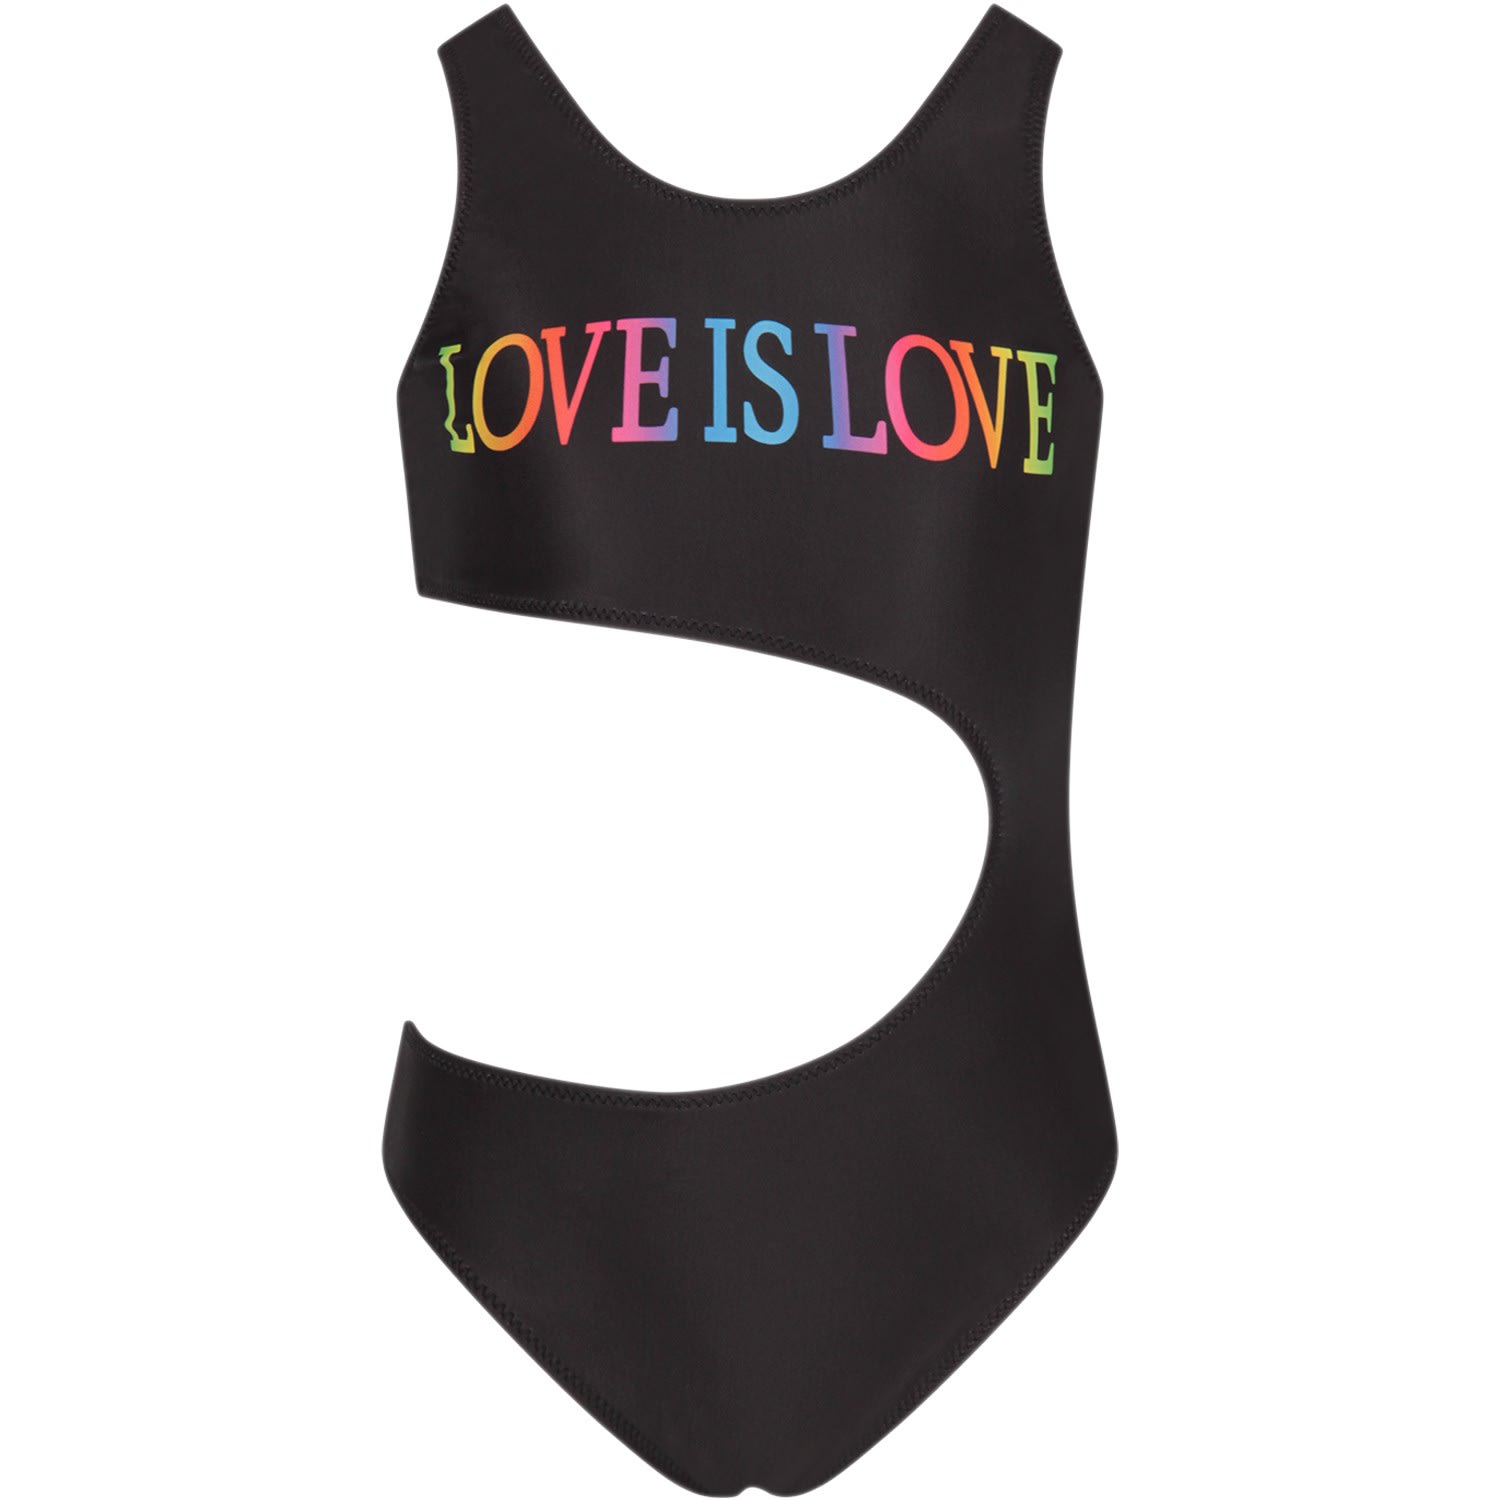 ALBERTA FERRETTI BLACK SWIMSUIT FOR GIRL WITH COLORFUL WRITING,11250629